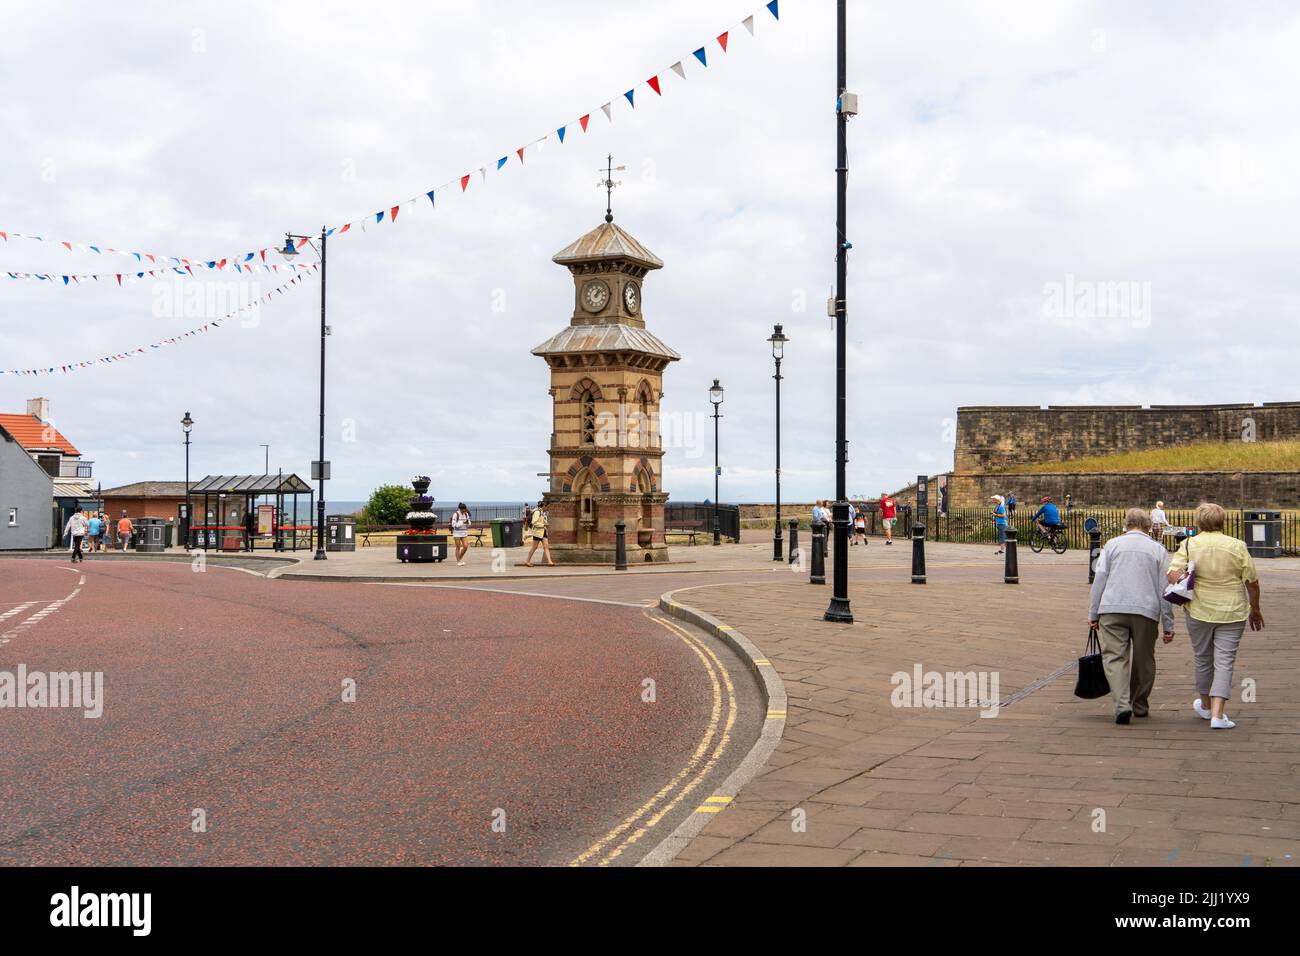 A view of the old clock tower on Front Street, Tynemouth Village, North Tyneside, UK, with tourists. Stock Photo